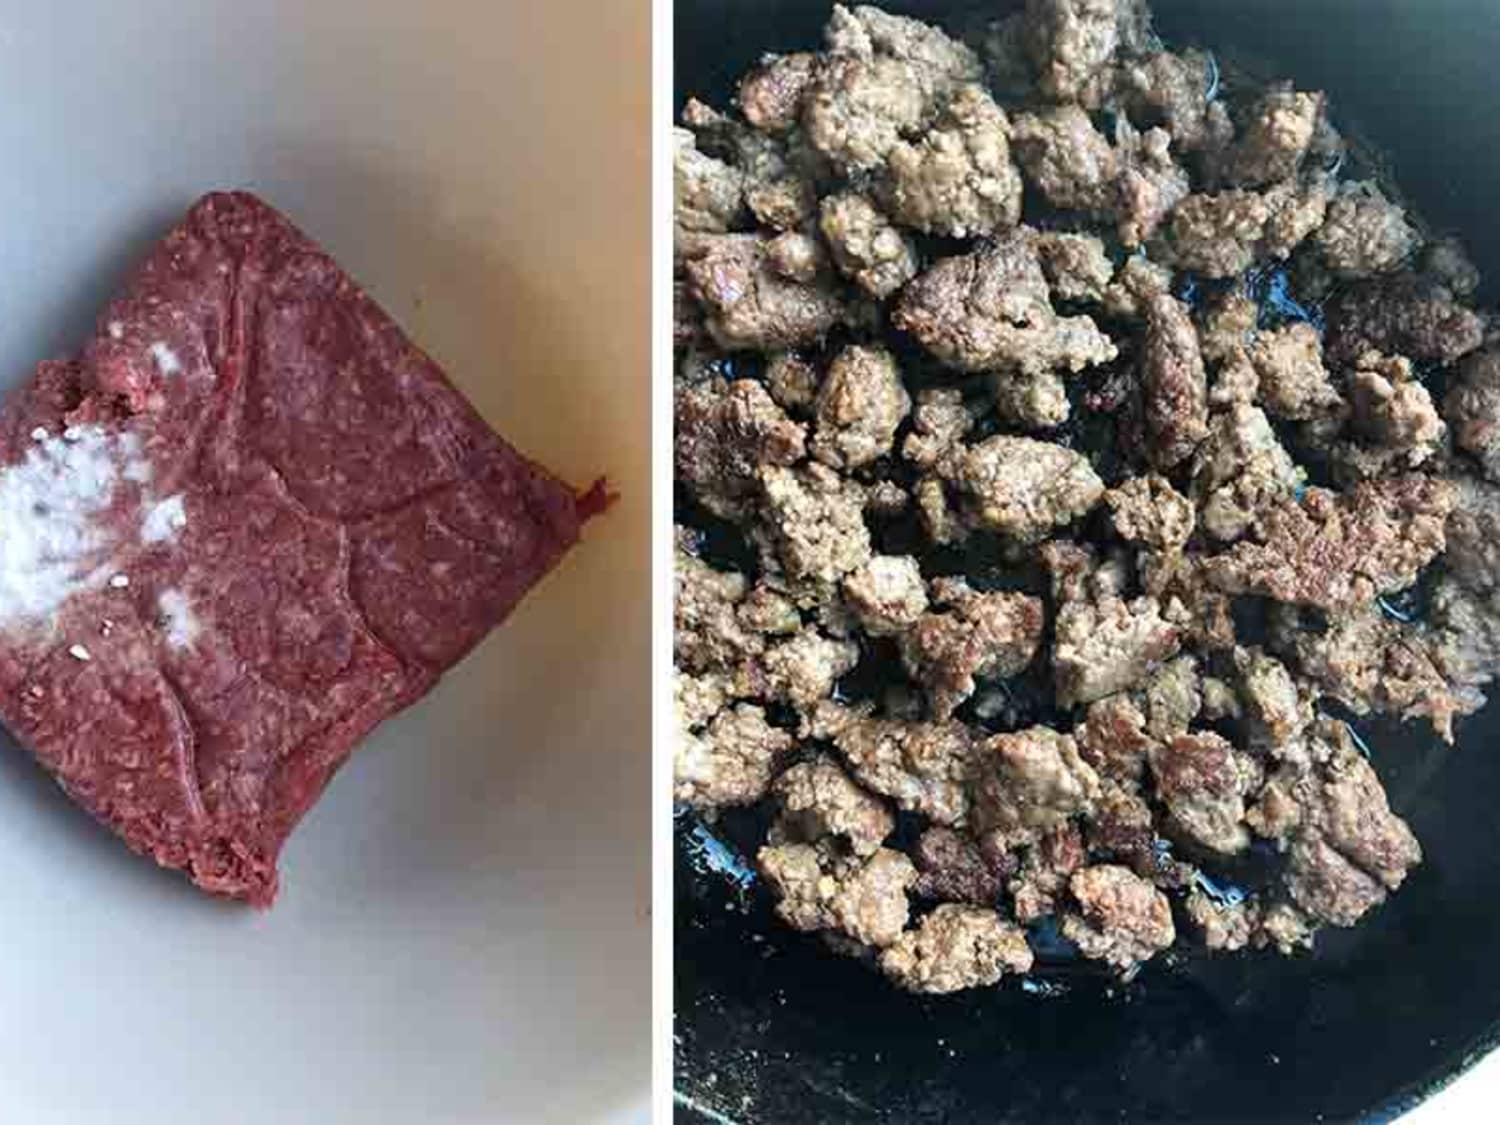 Yes, You Should Be Adding Baking Soda When Cooking Ground Beef